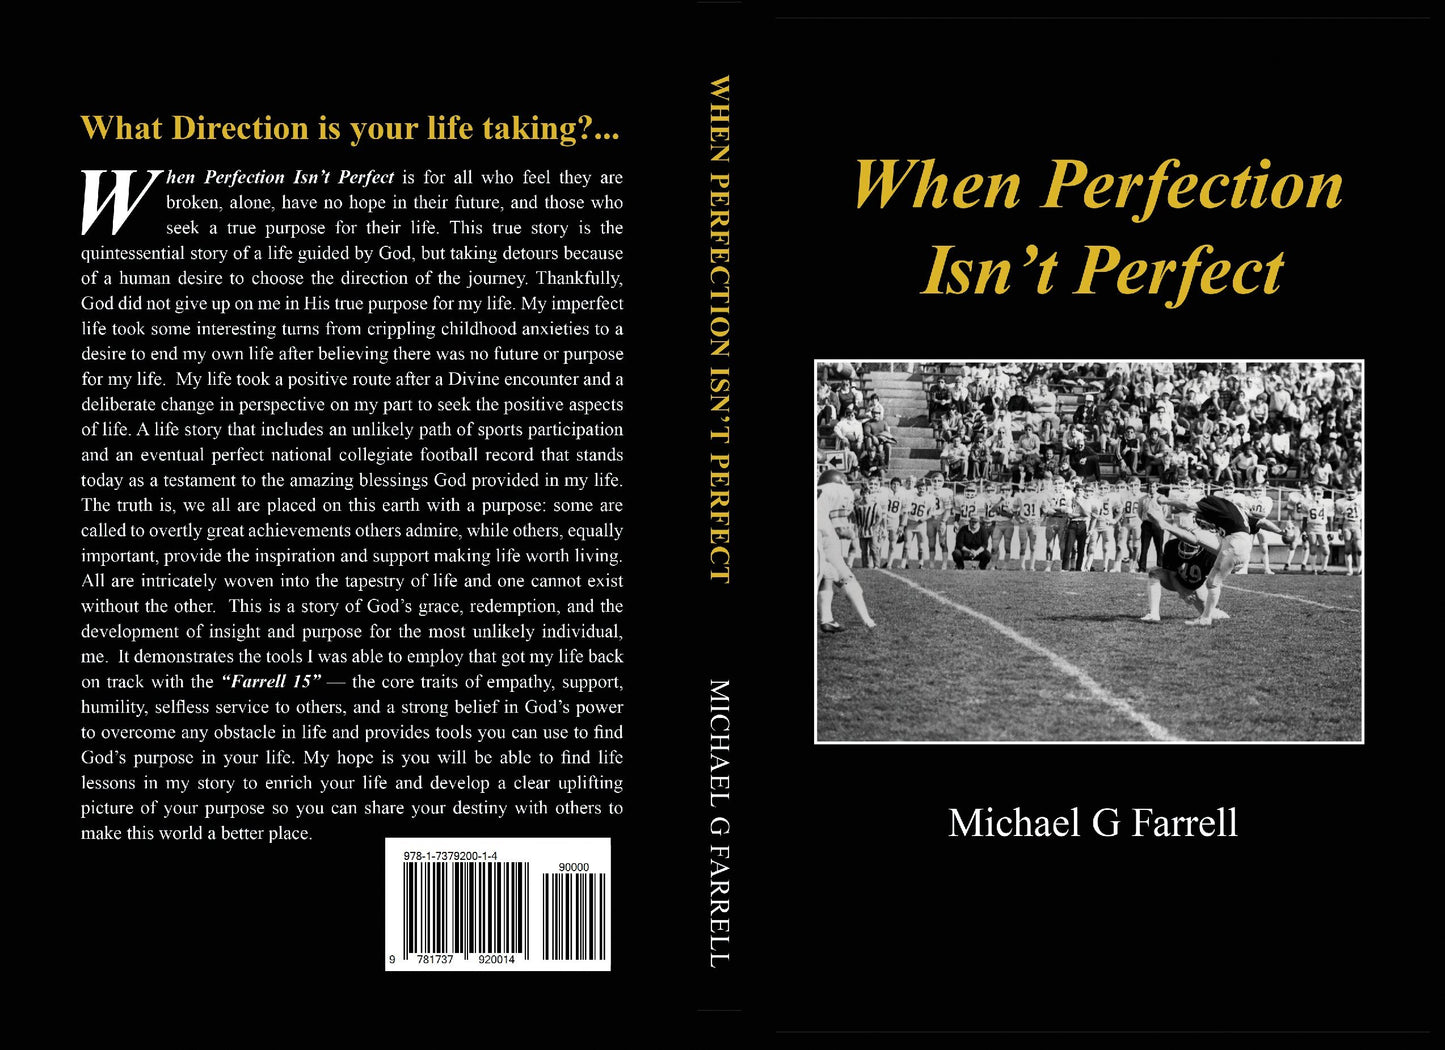 When Perfection Isn't Perfect - Paperback